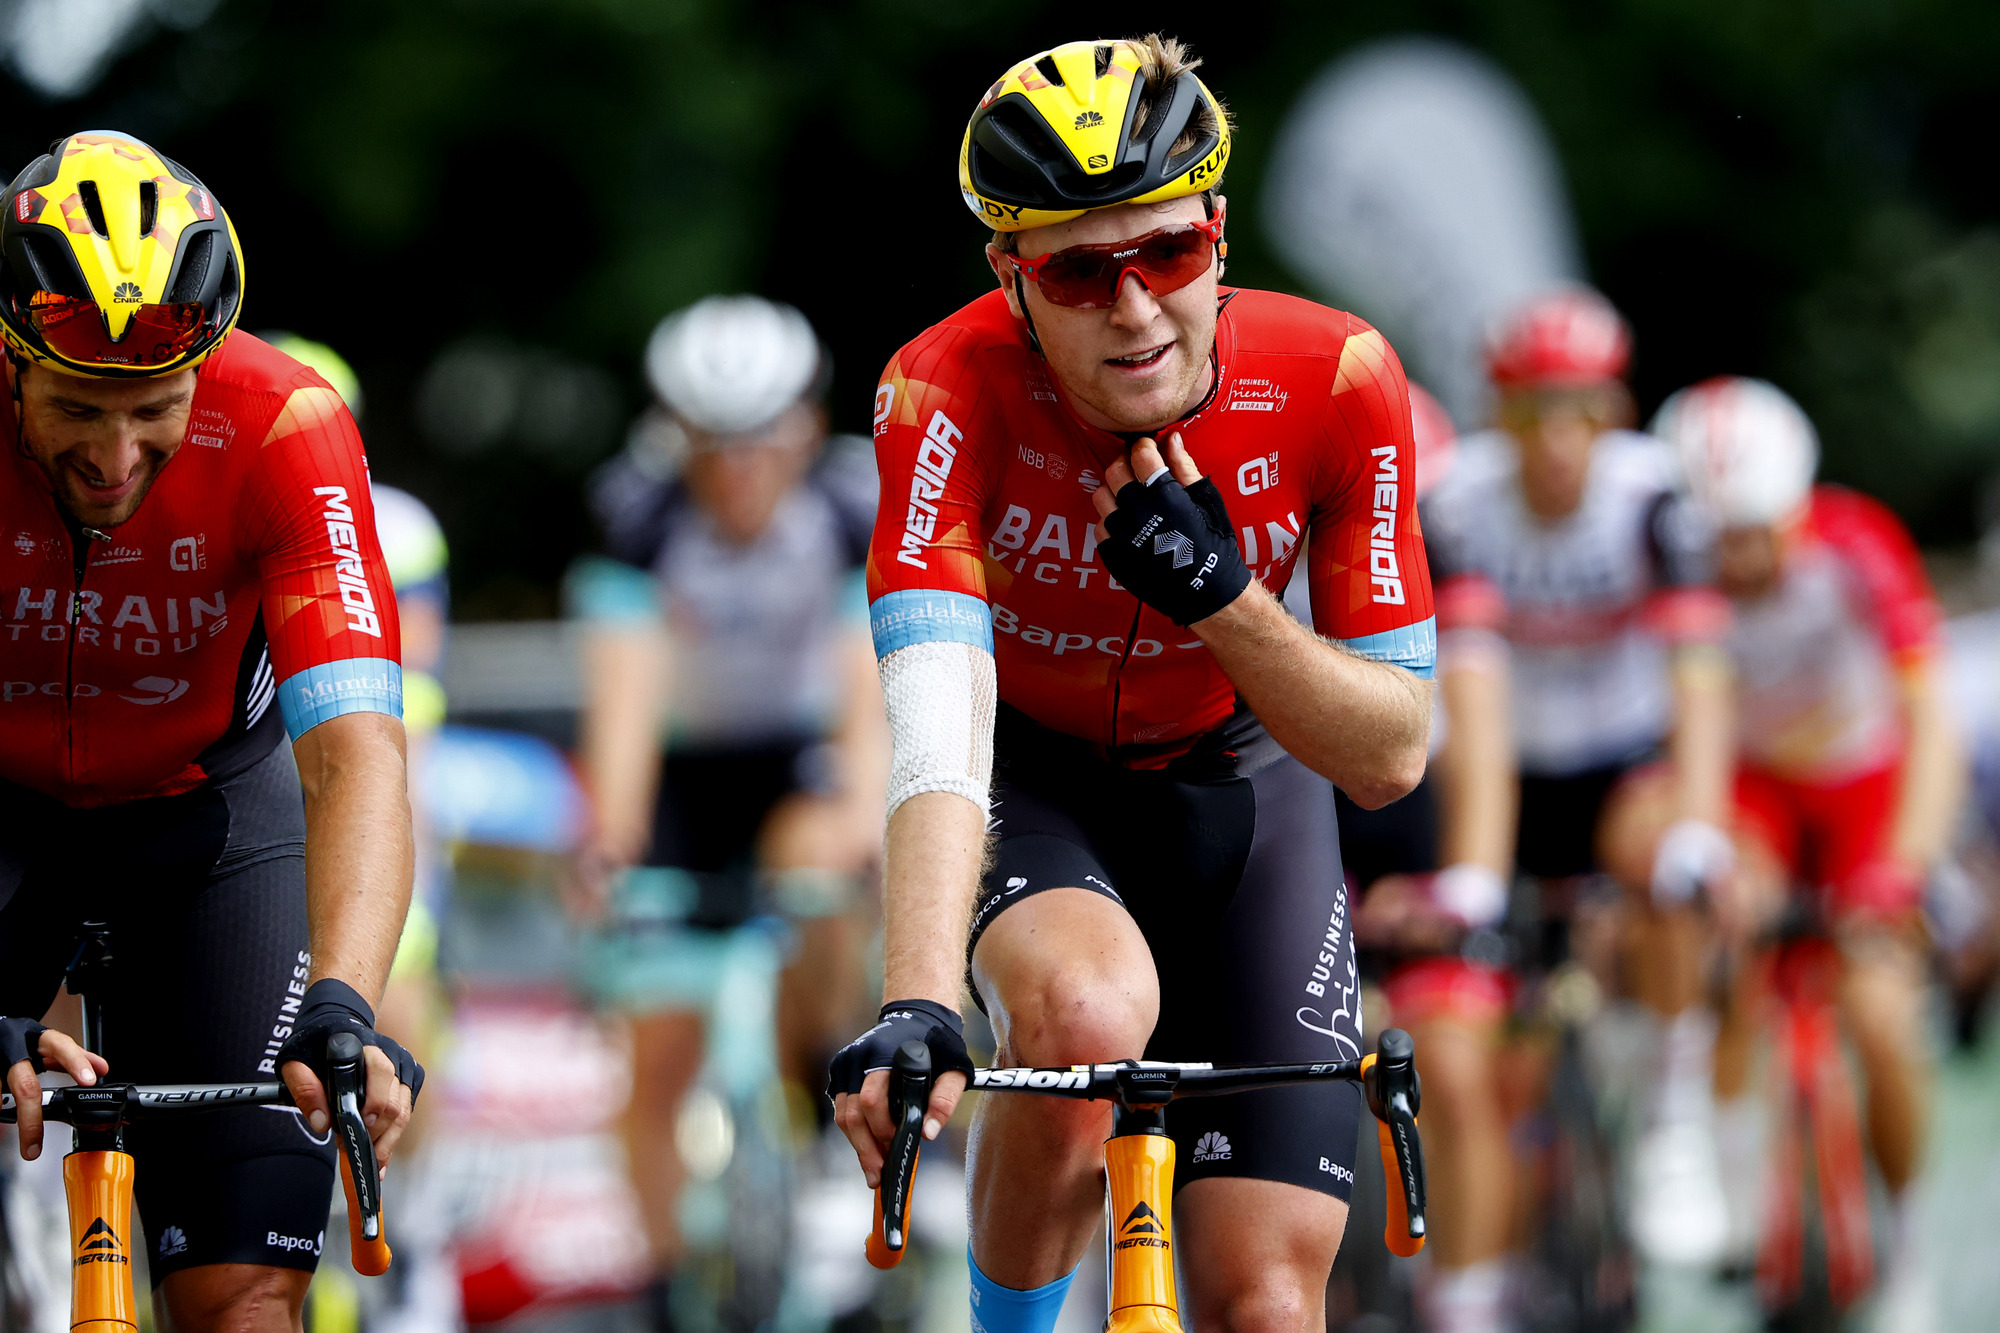 Tour de France’s youngest rider Wright finding his feet amidst crashes